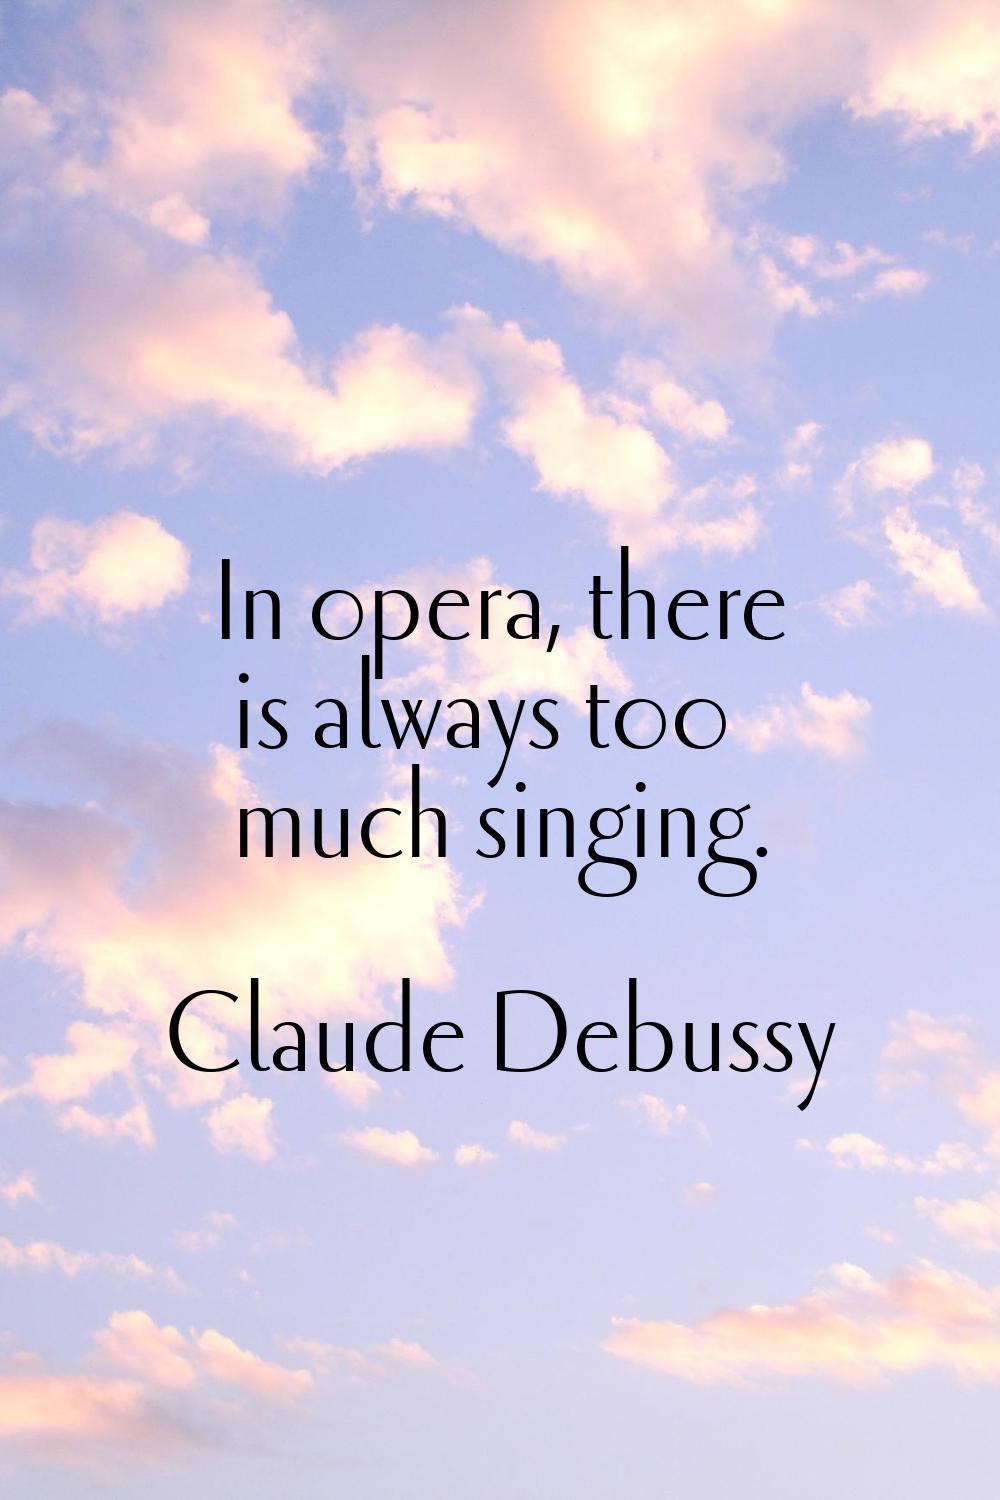 In opera, there is always too much singing.